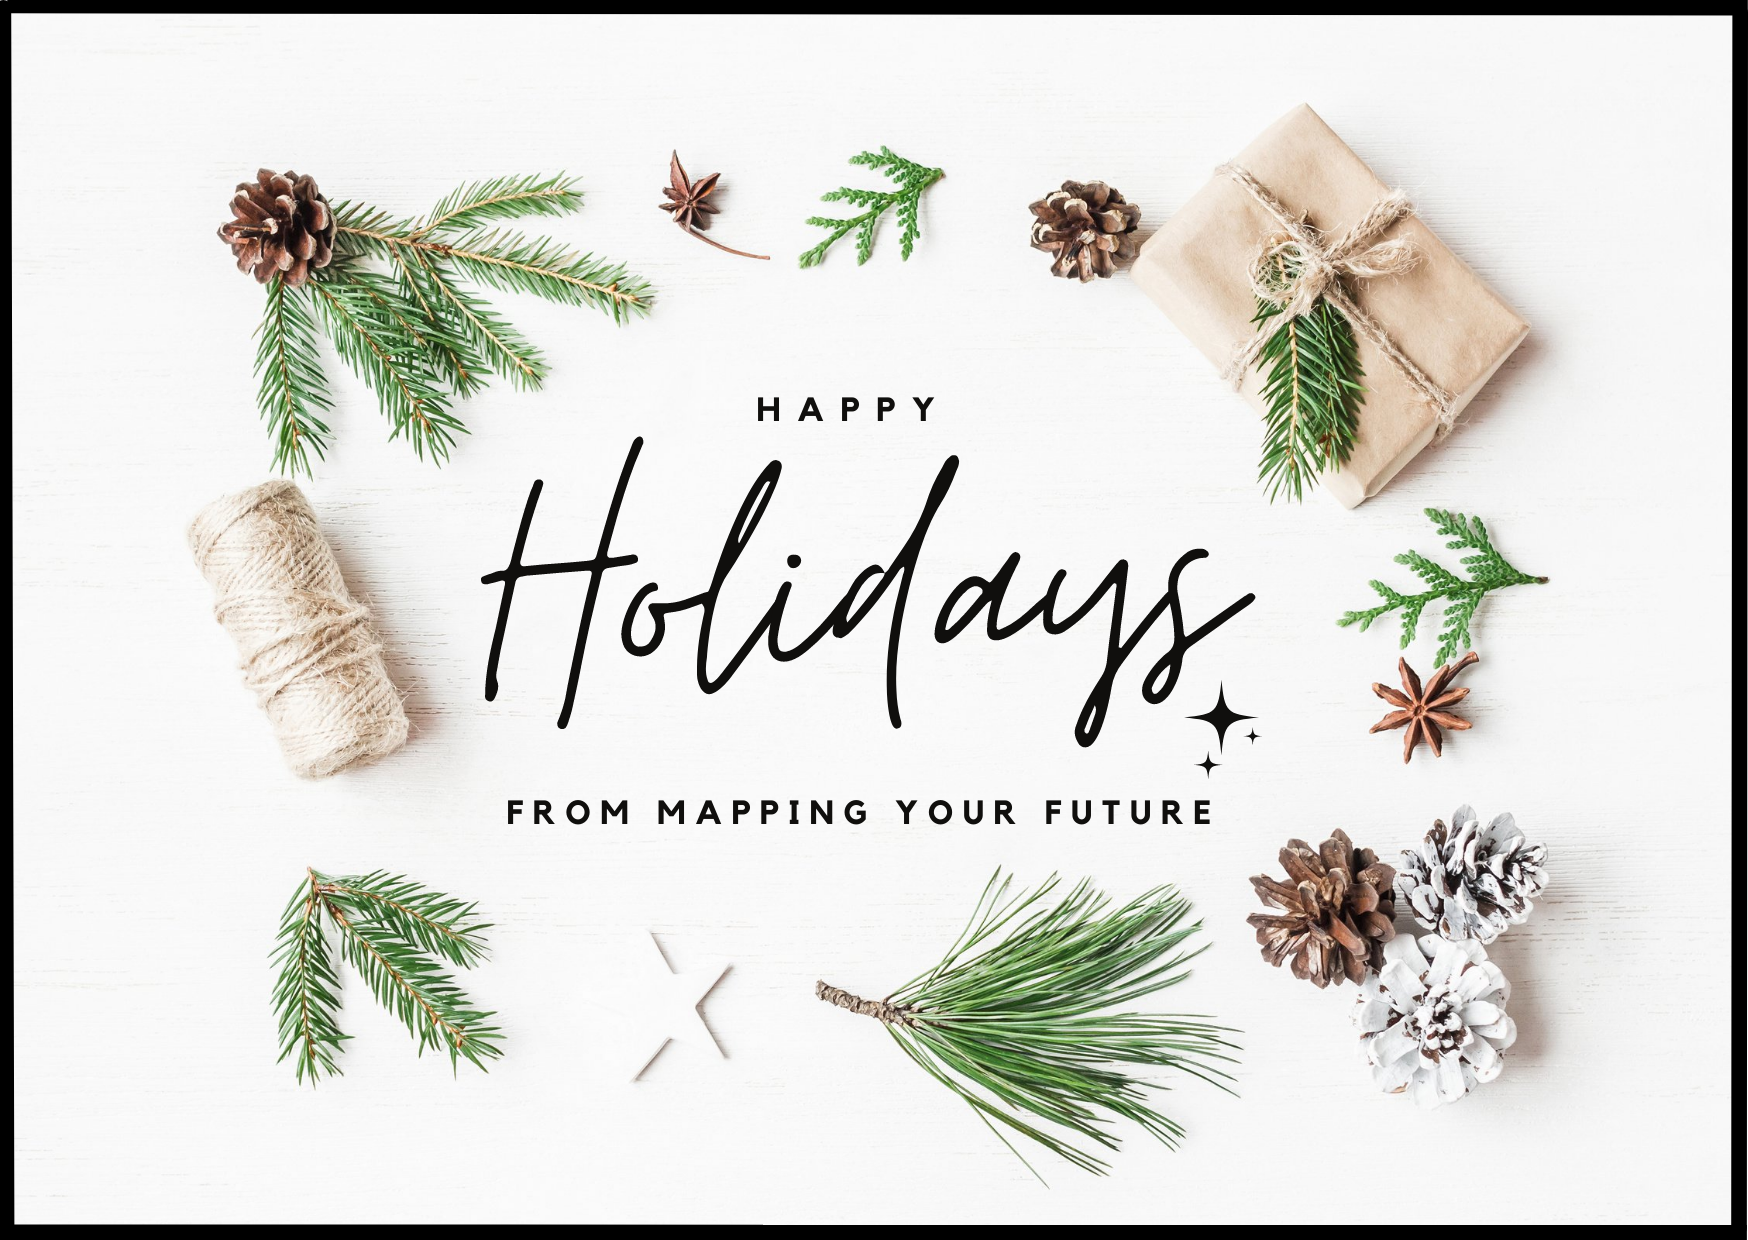 Happy holidays from the Mapping Your Future staff